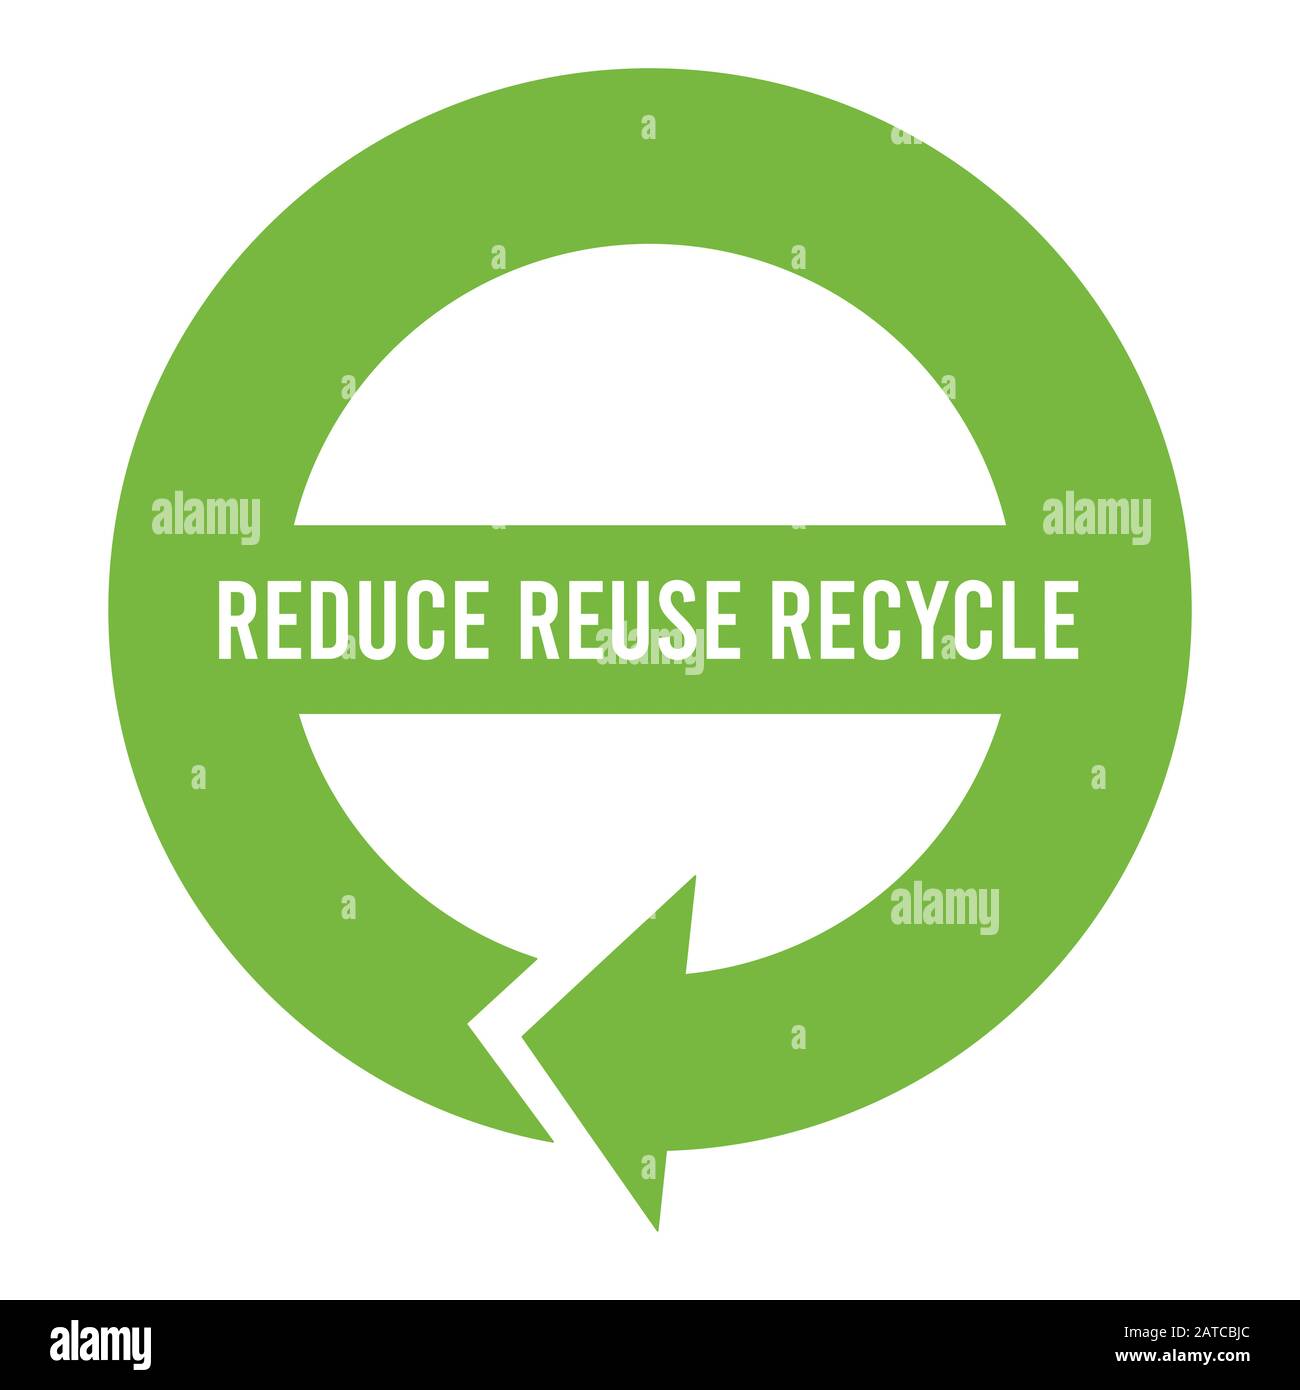 Reduce, reuse, recycle sign Stock Photo